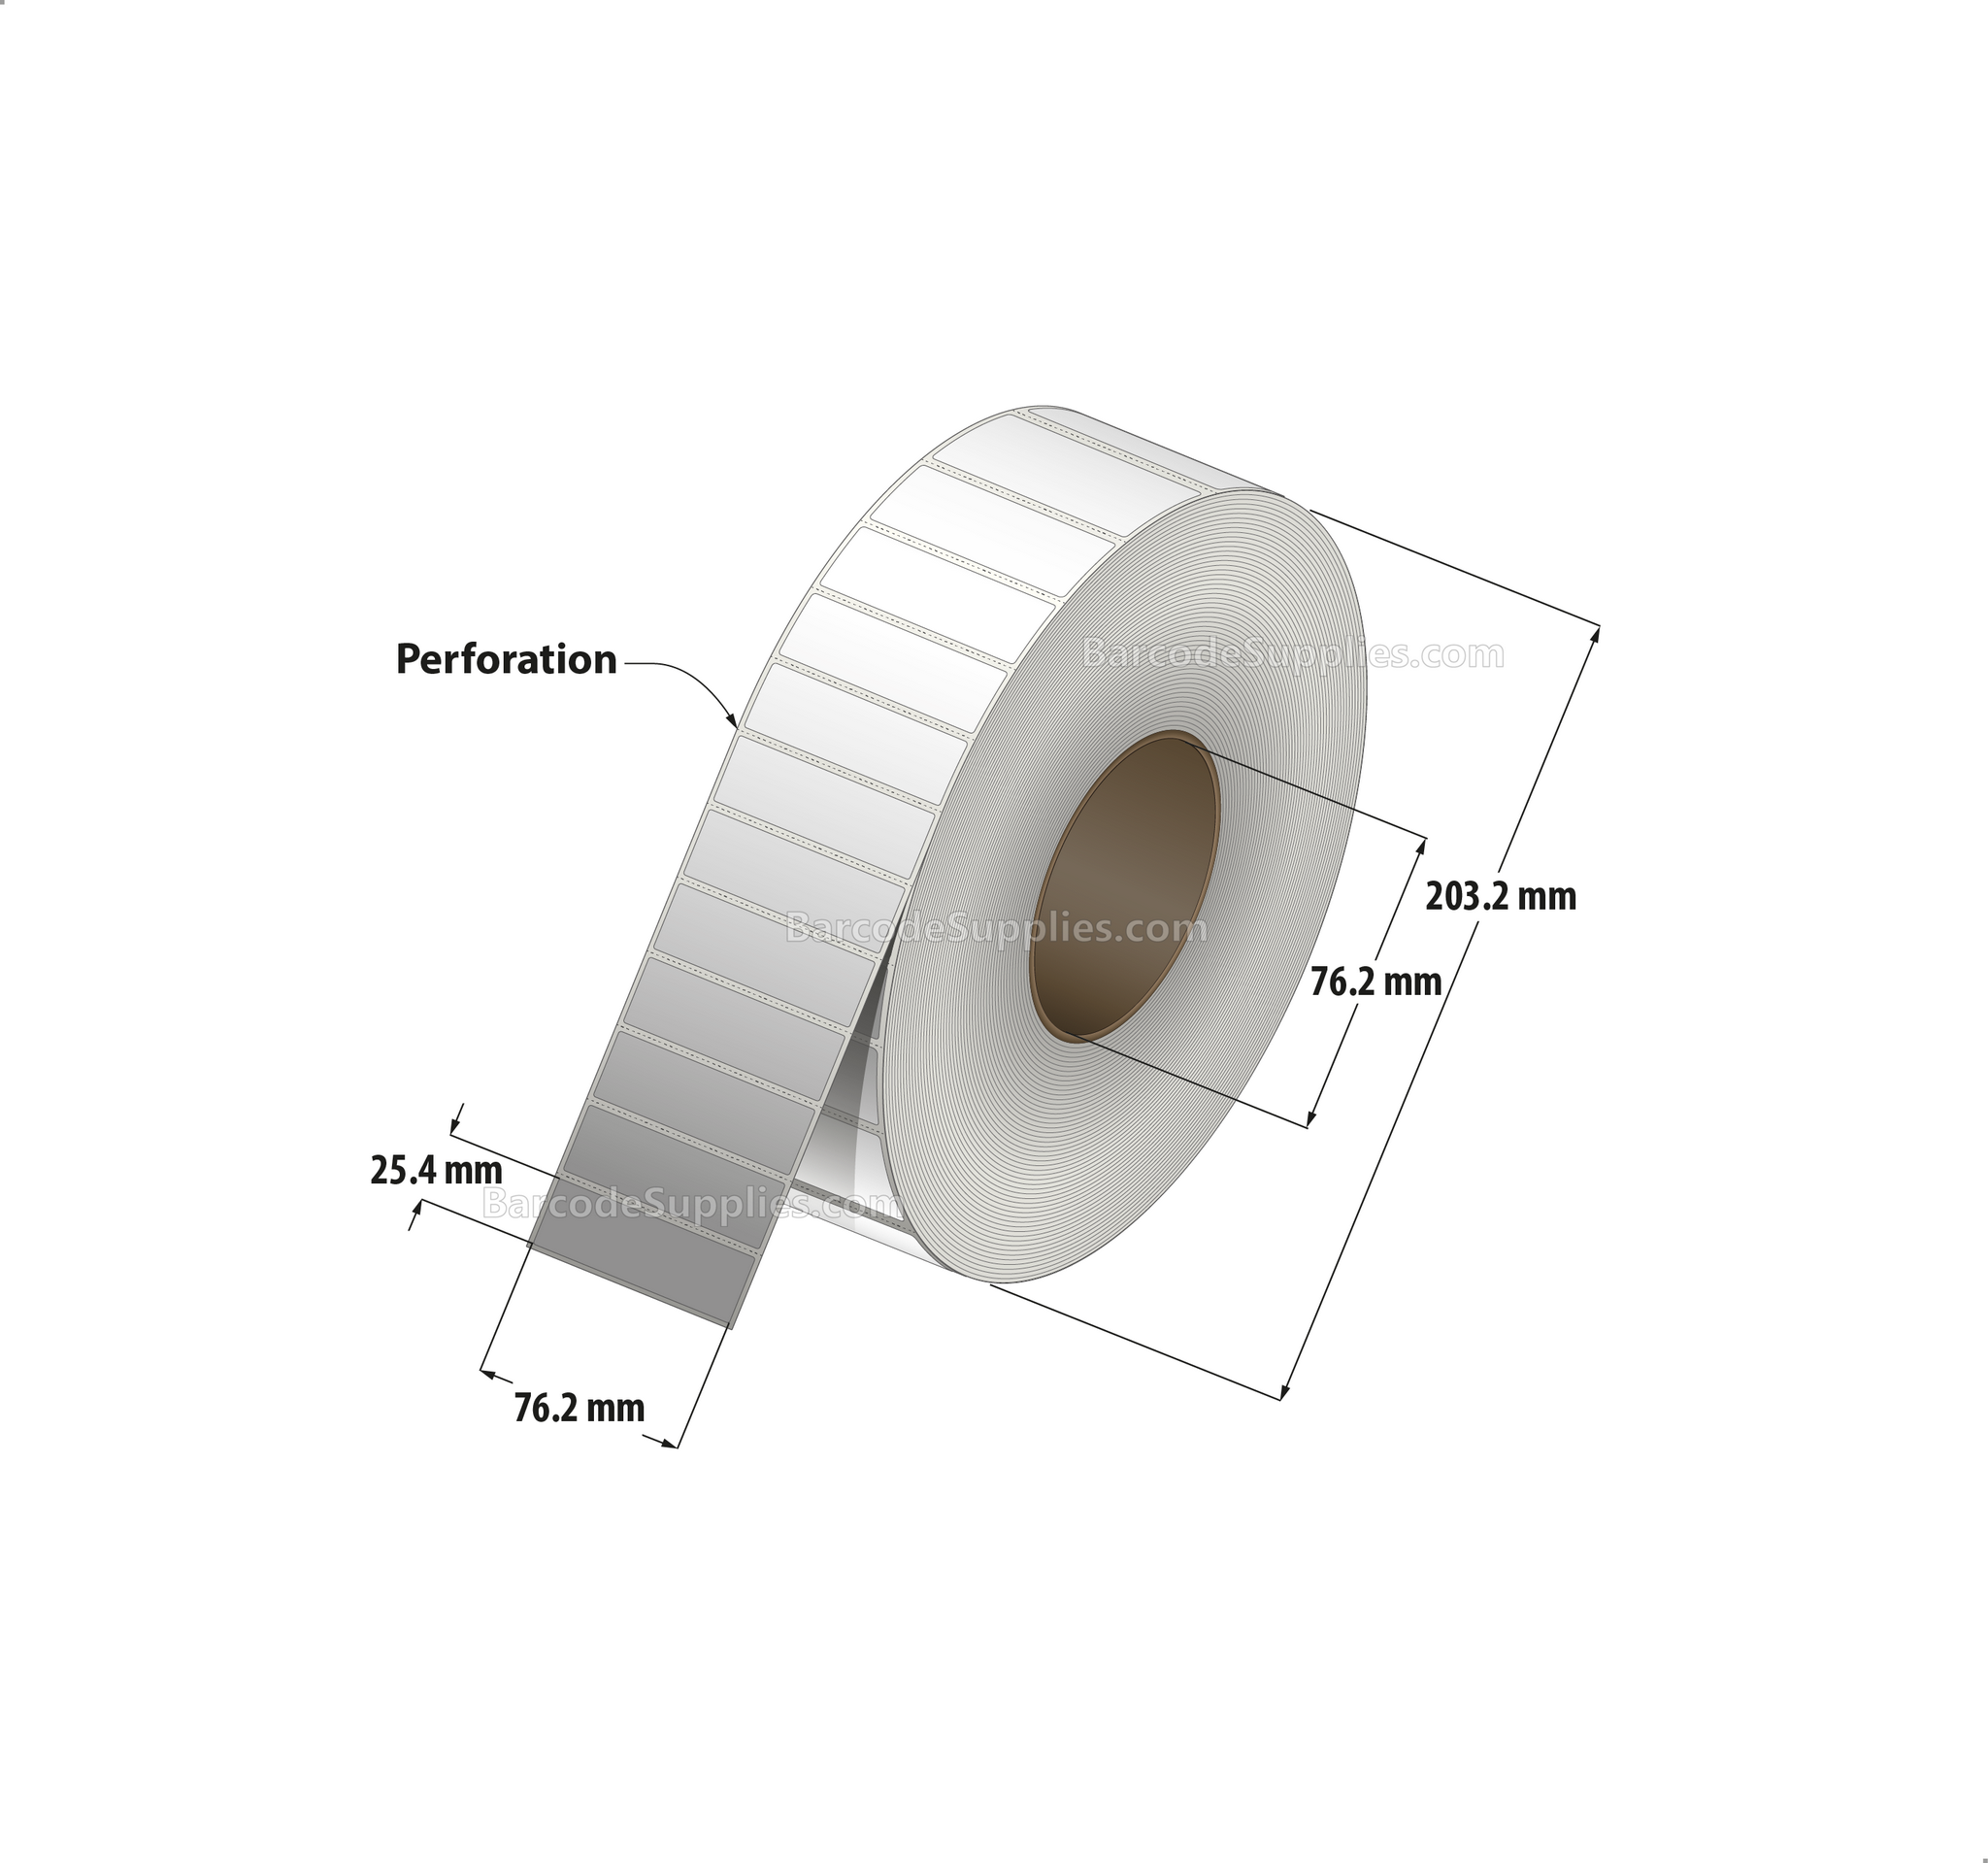 3 x 1 Thermal Transfer White Labels With Permanent Adhesive - Perforated - 5500 Labels Per Roll - Carton Of 8 Rolls - 44000 Labels Total - MPN: RT-3-1-5500-3